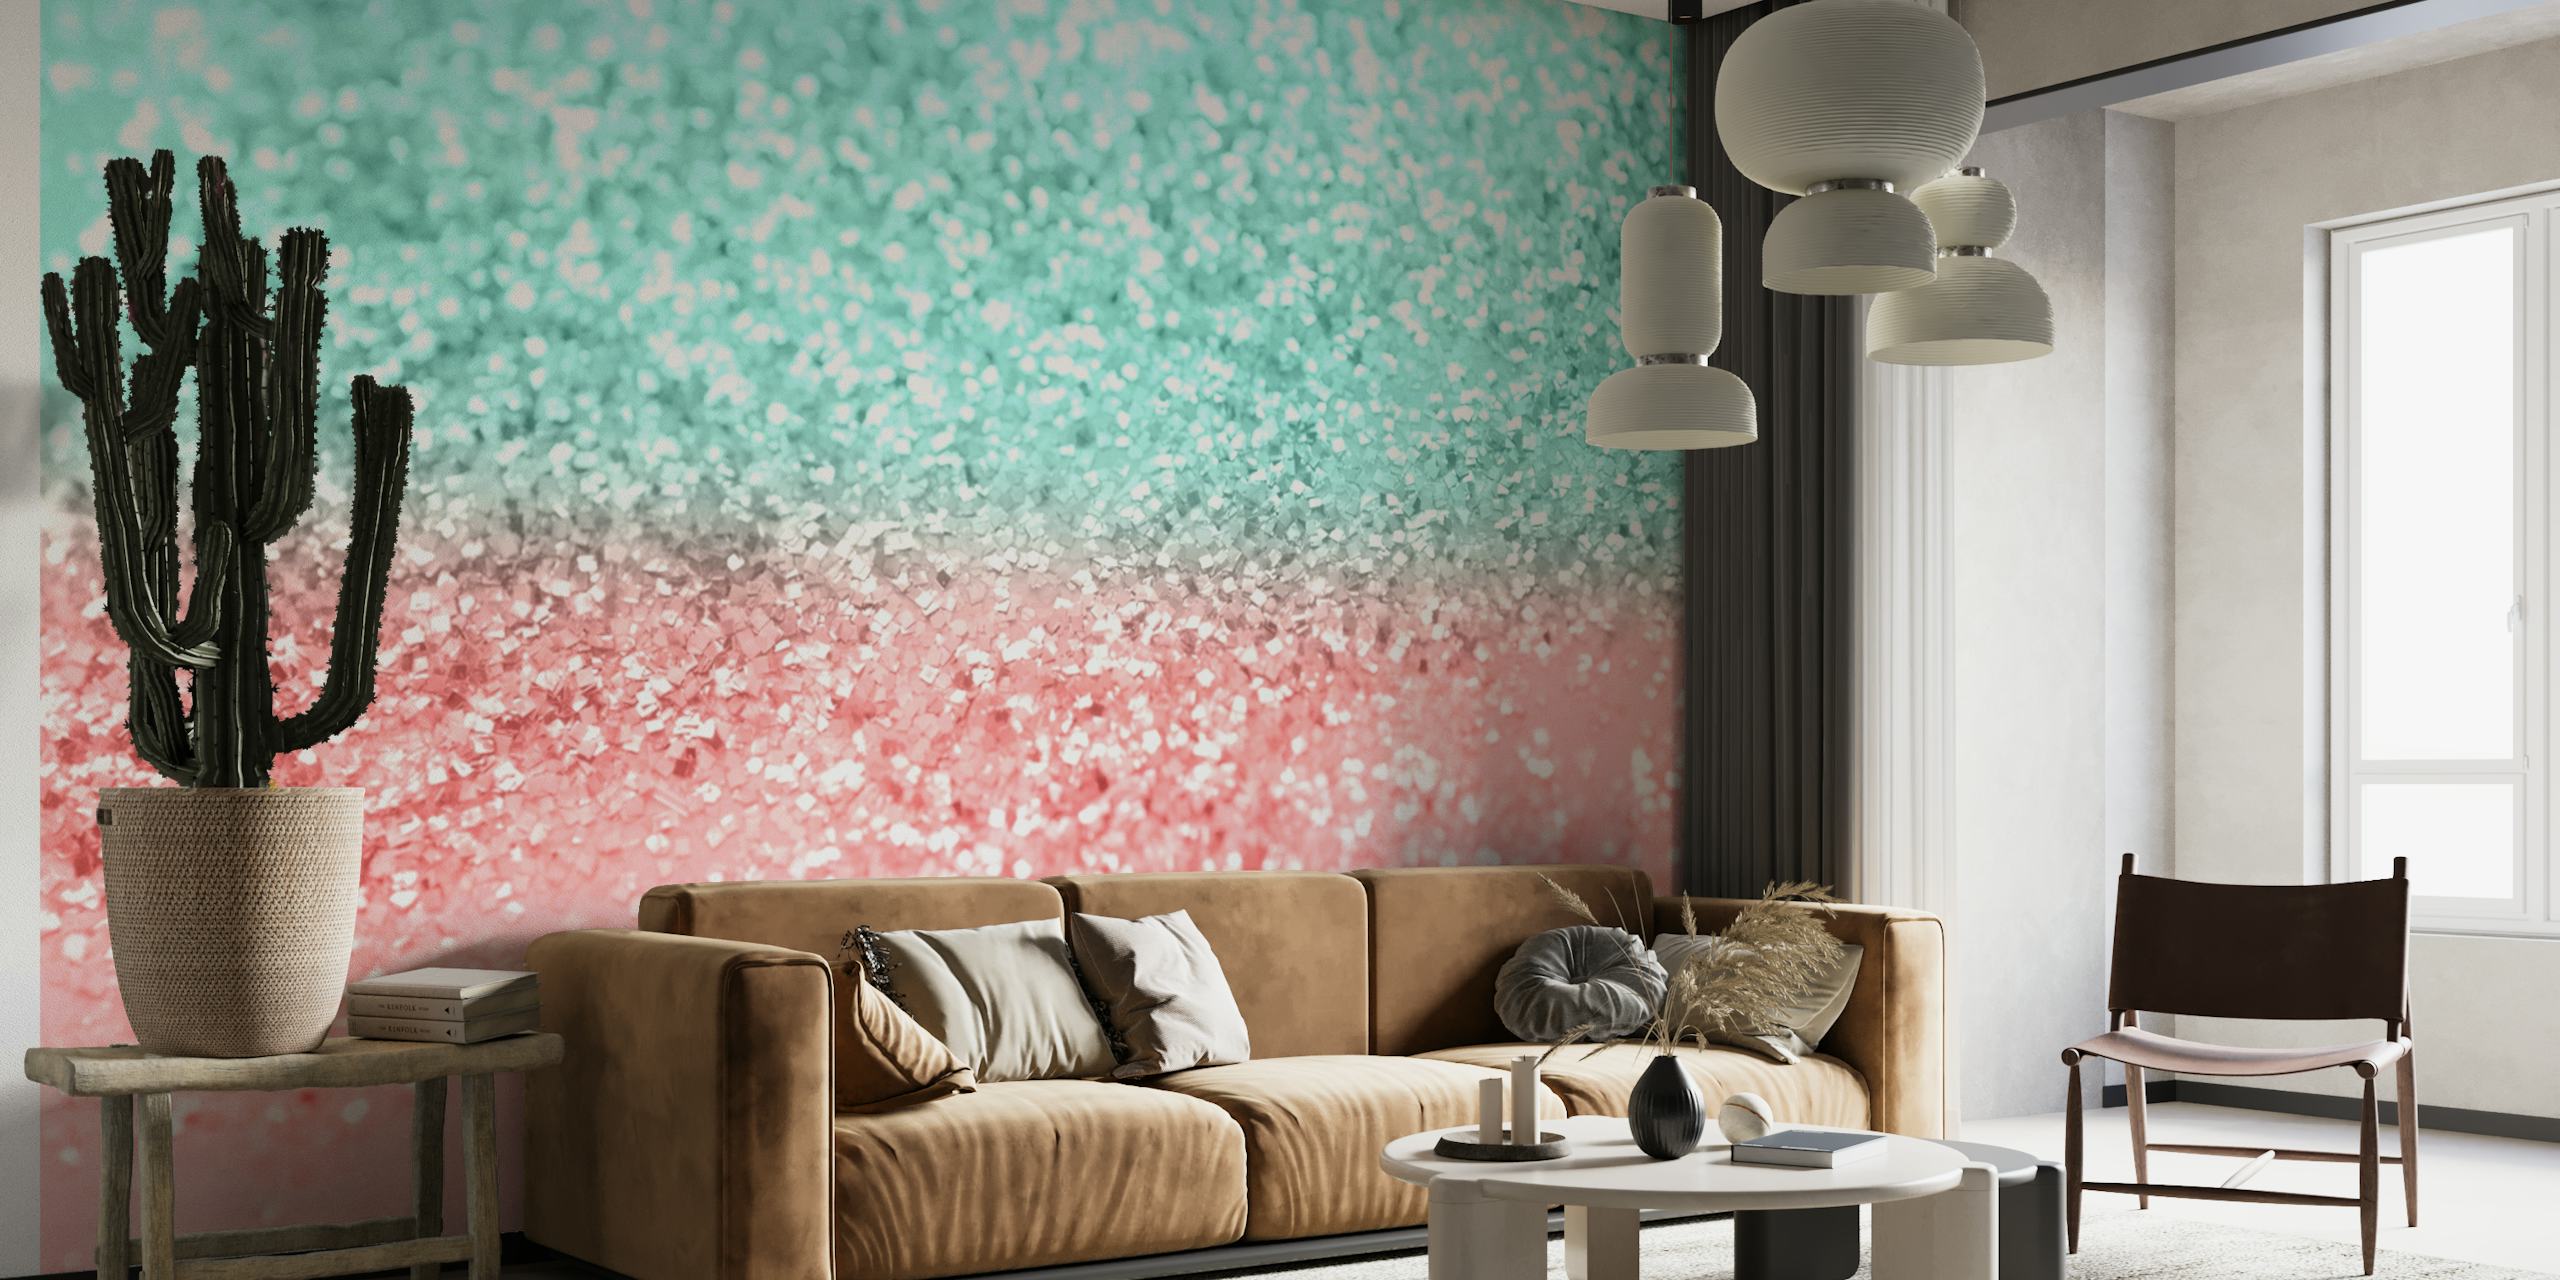 Summer Vibes Glitter 1 wall mural with pastel aqua and pink shades and a glittery effect